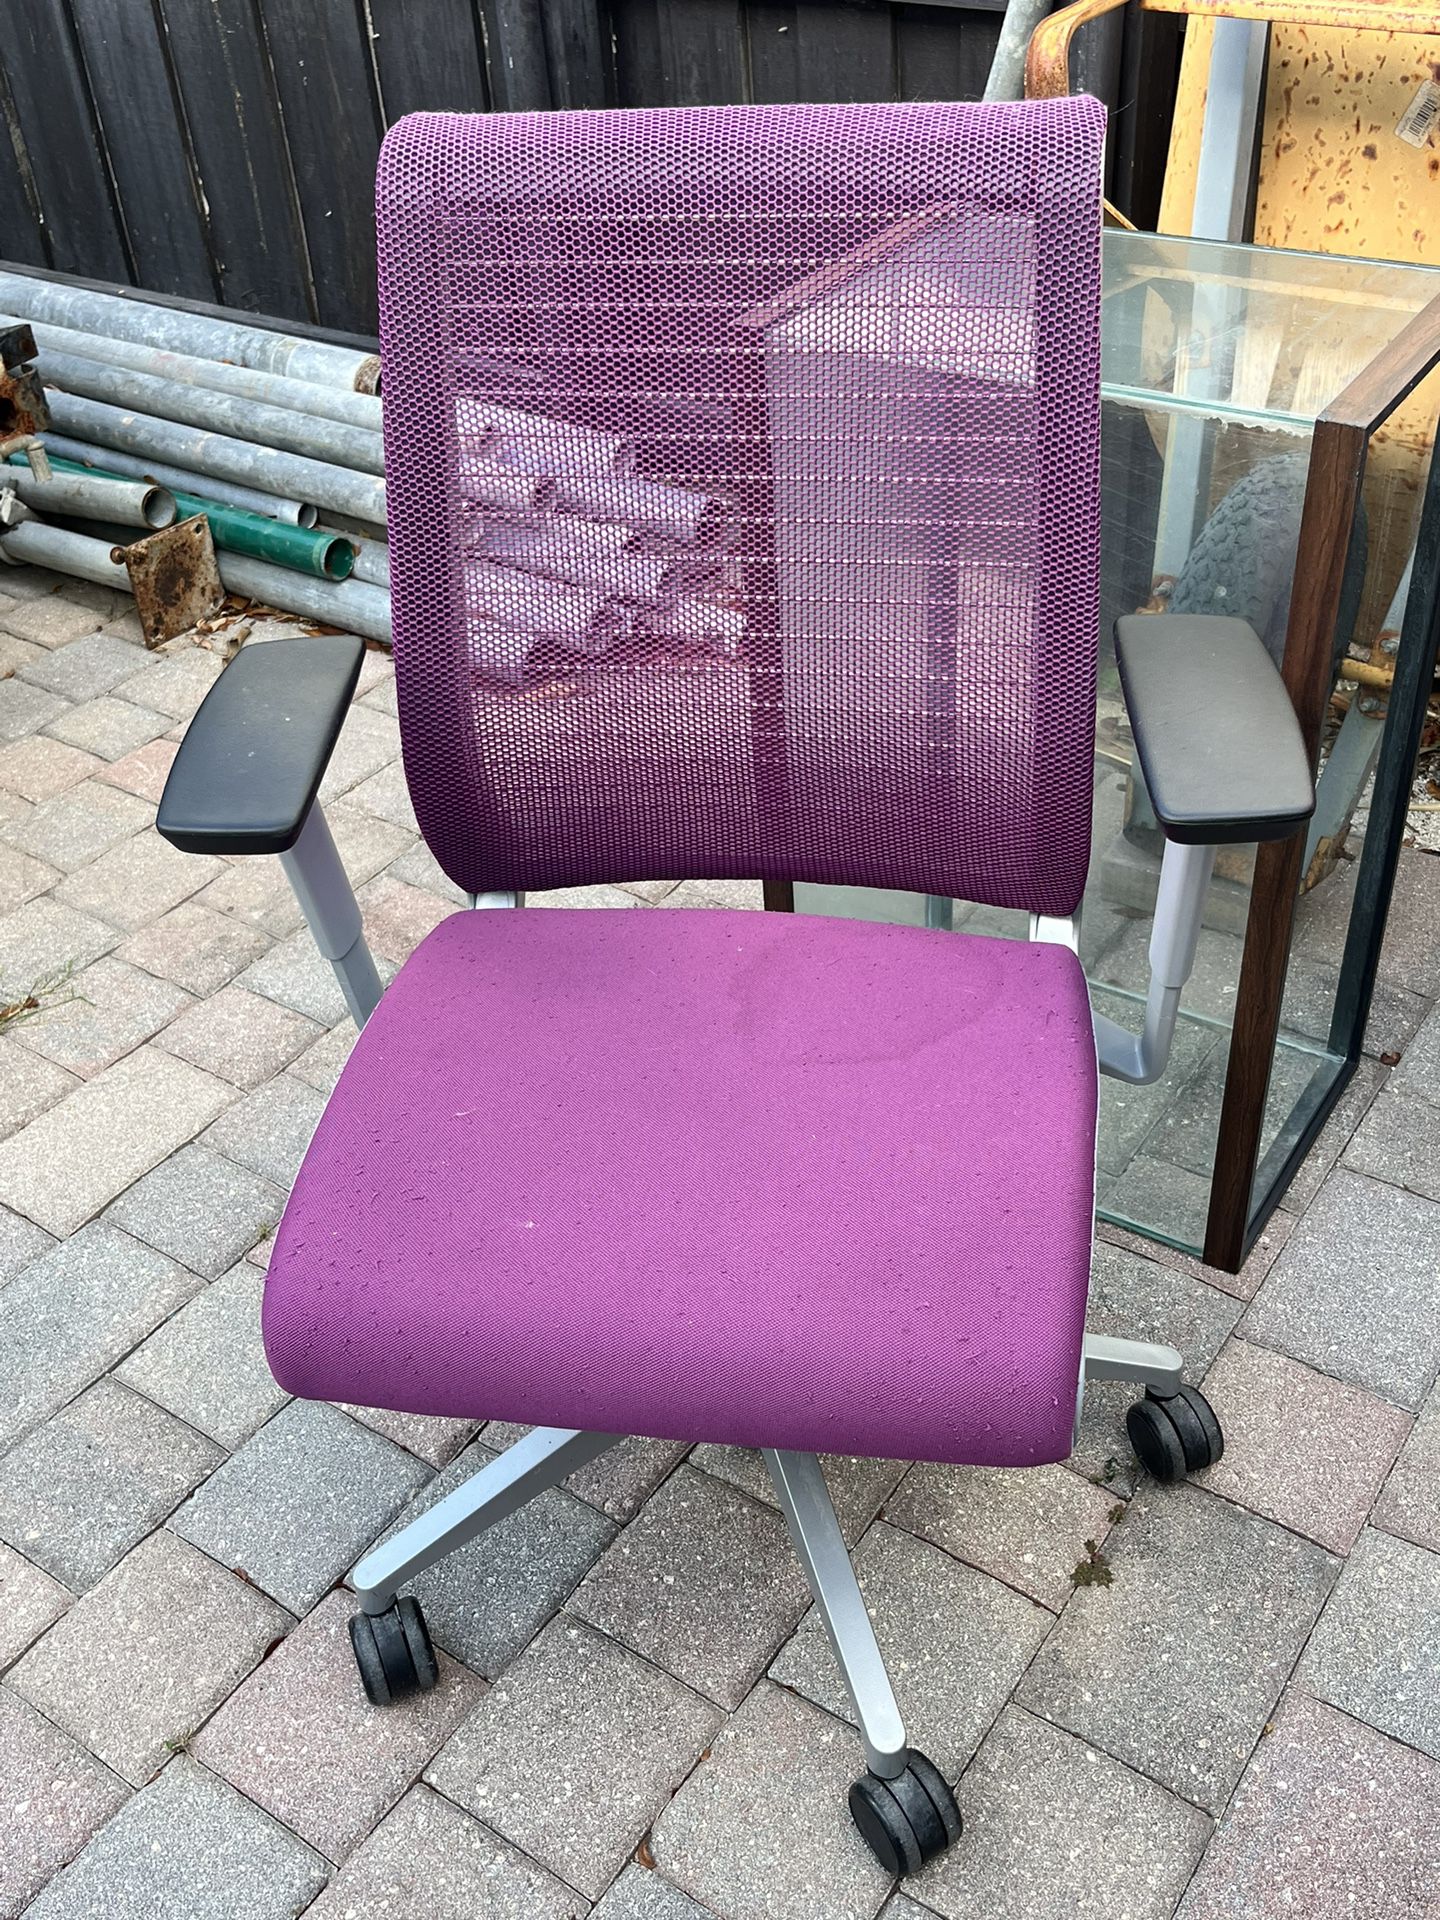 steelcase chair Think model purple great condition office chair adjustable